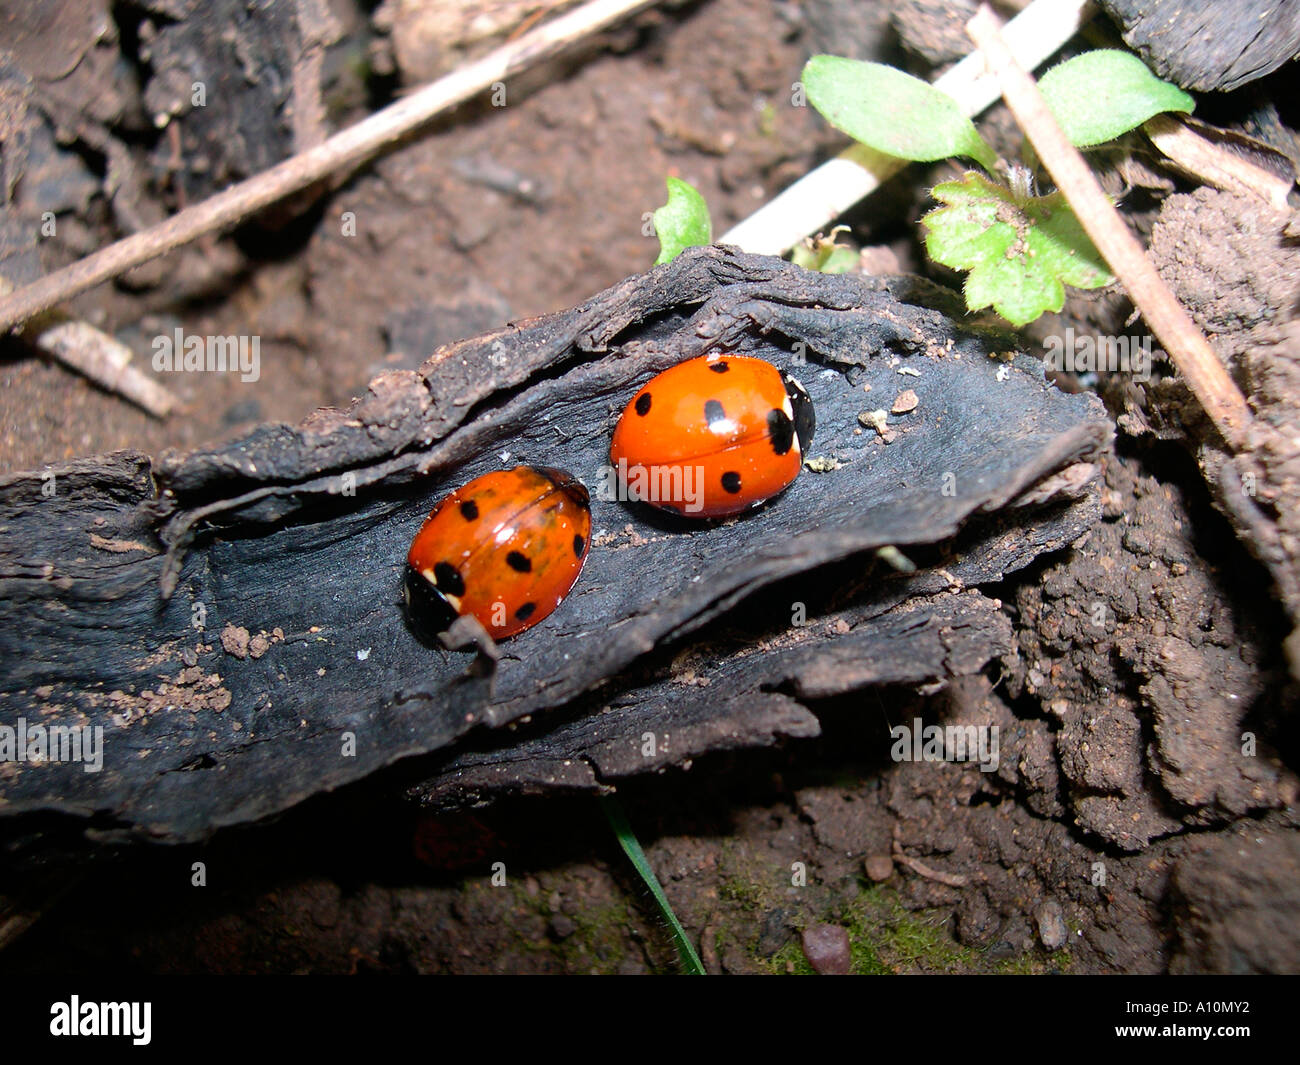 two six spot ladybirds on a bit of bark ladybirds are the gardeners friend eating aphids that spoil plants Stock Photo